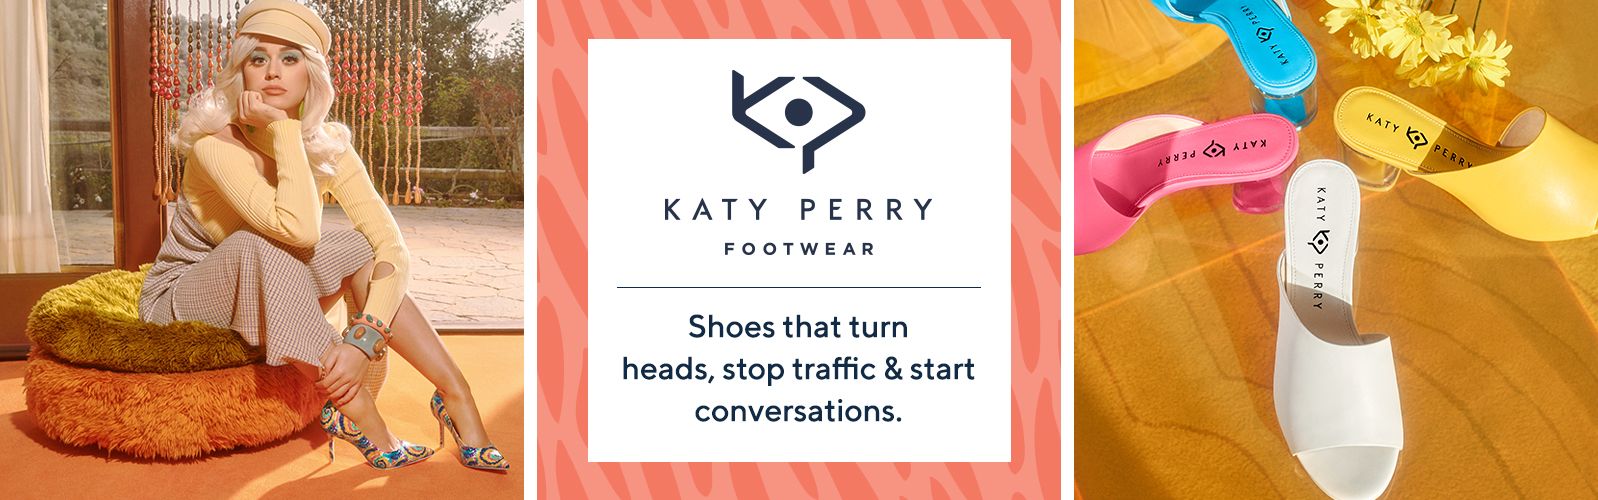 katy perry christmas shoes qvc